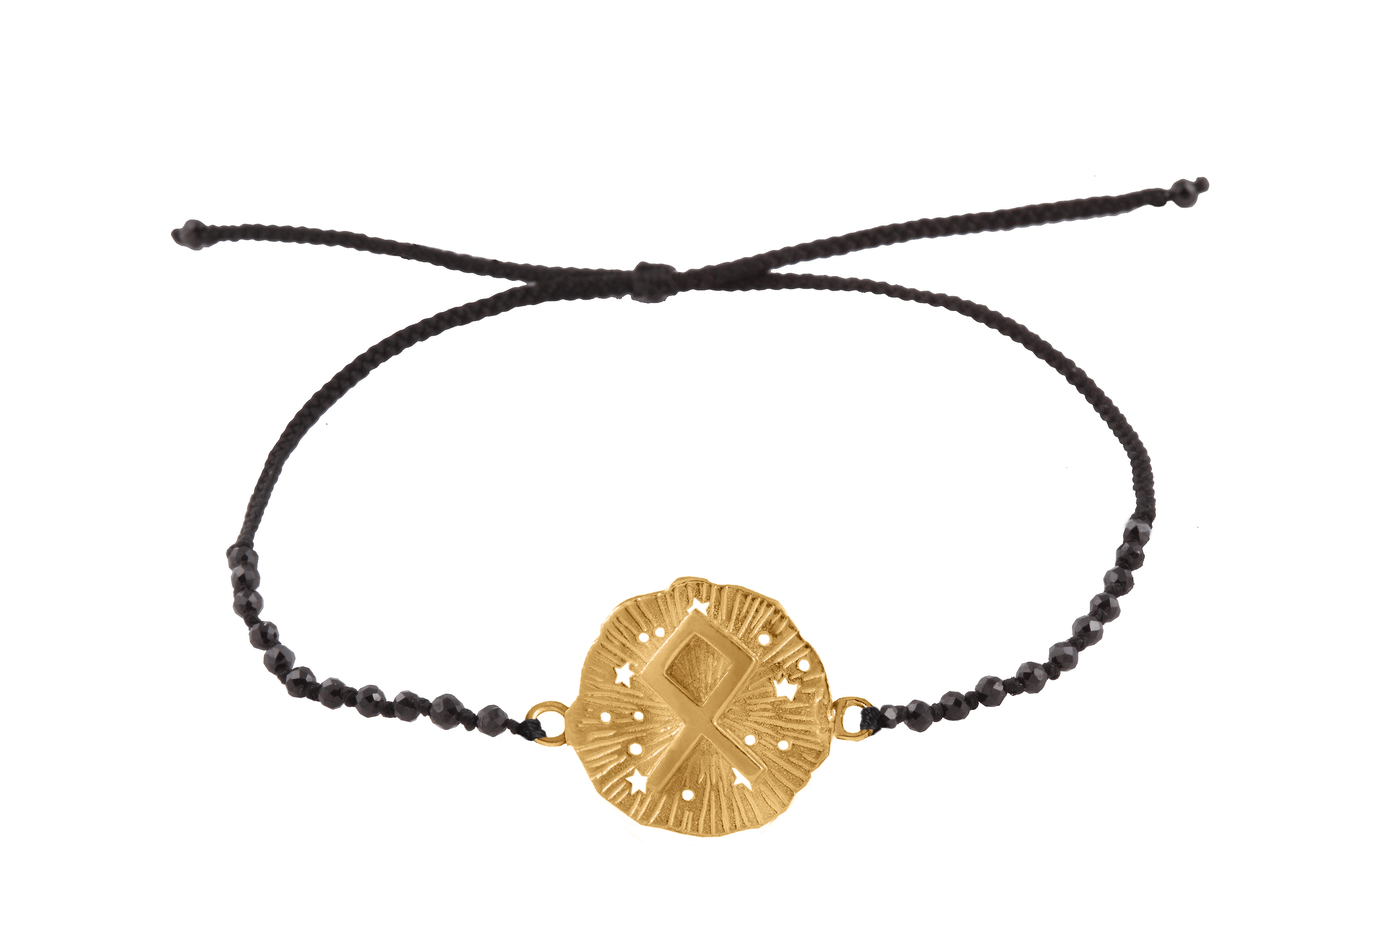 Runic medallion amulet Odal bracelet with beads. Gold plated